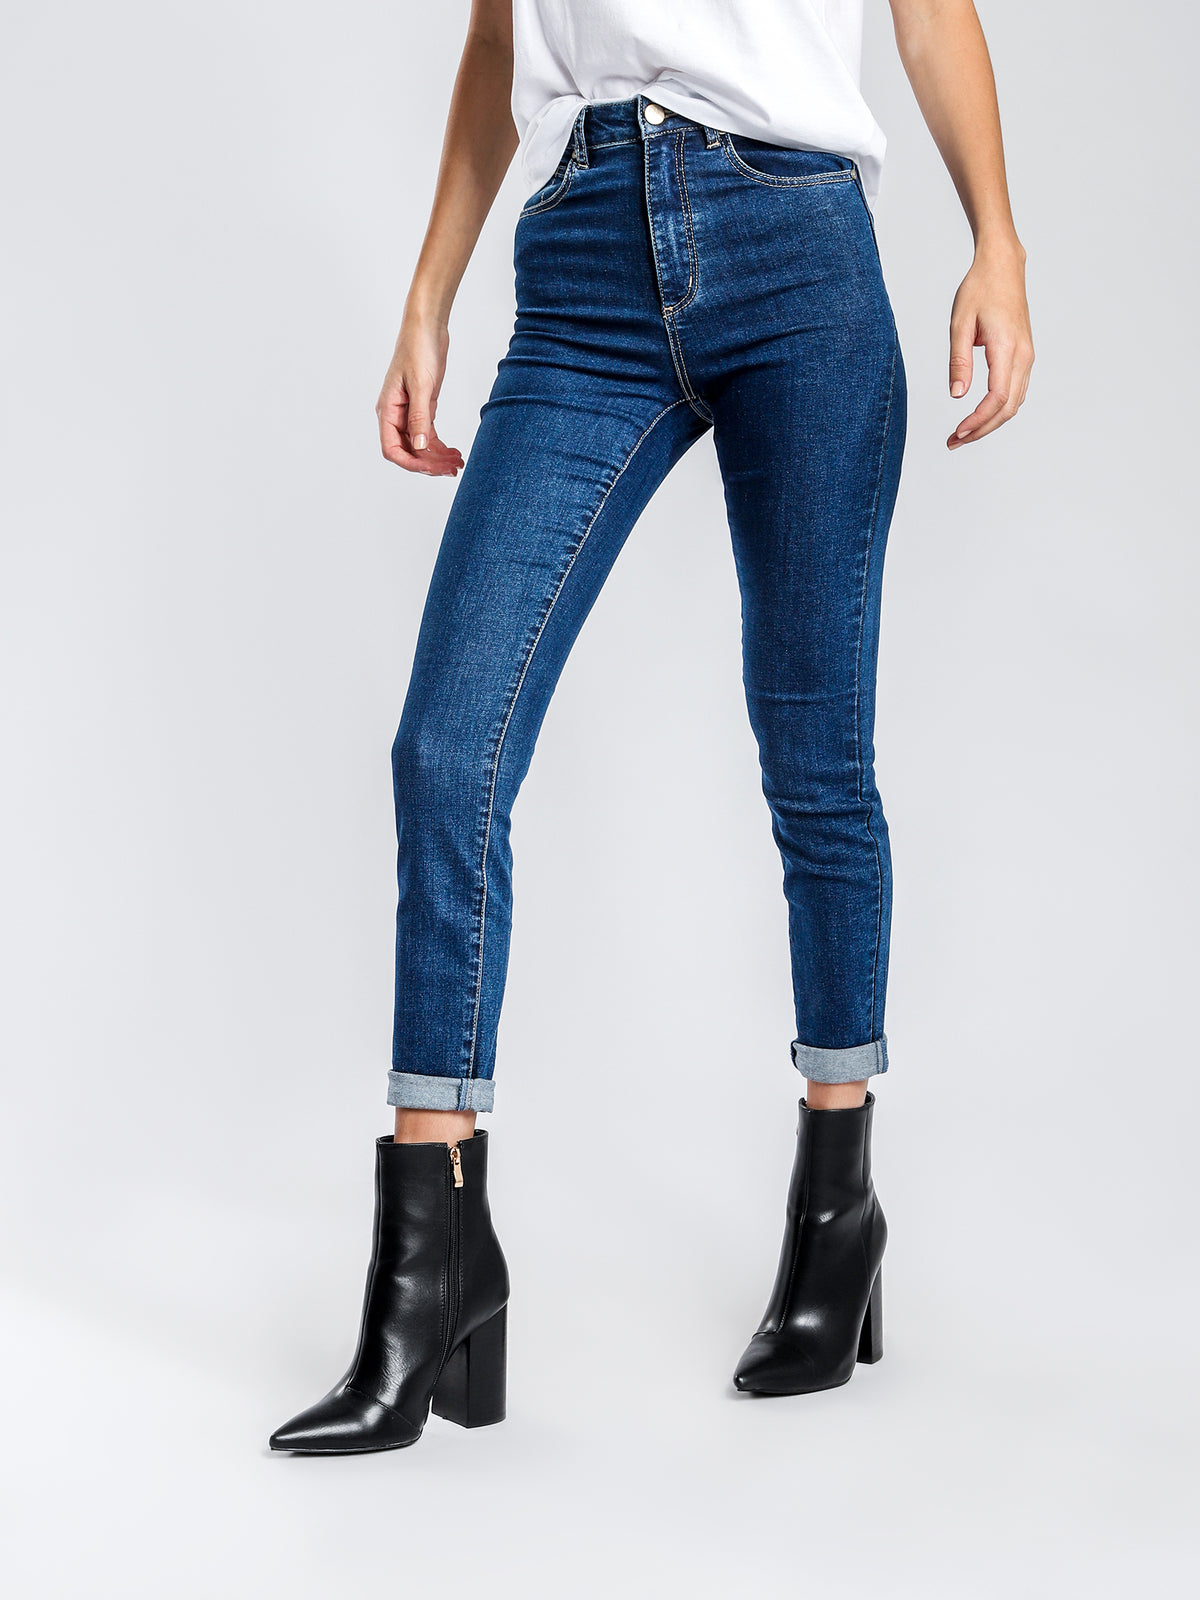 A High Skinny Ankle Basher Jeans in Blue Denim